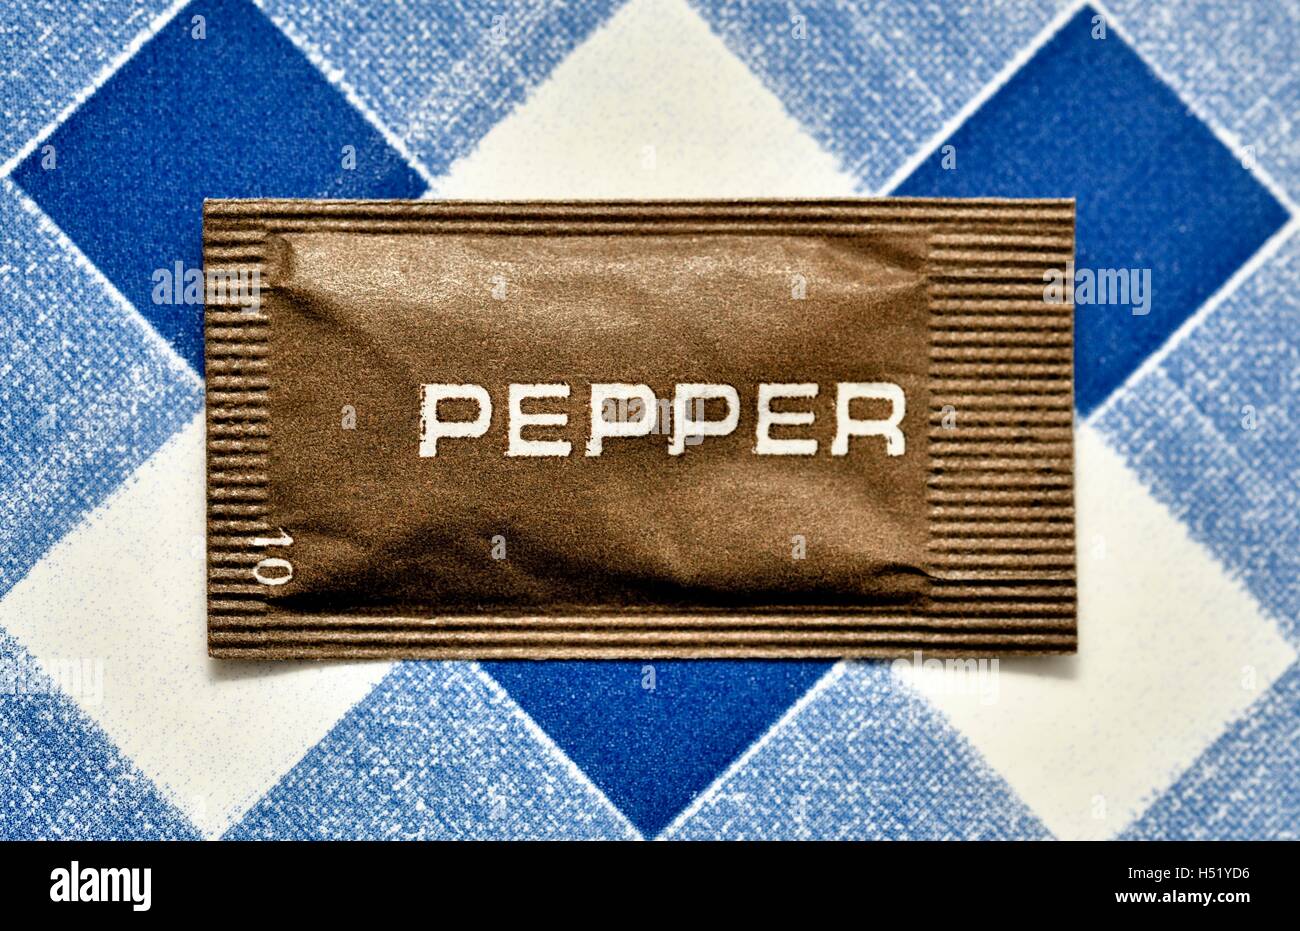 Sachet of catering pepper on a blue gingham background Stock Photo